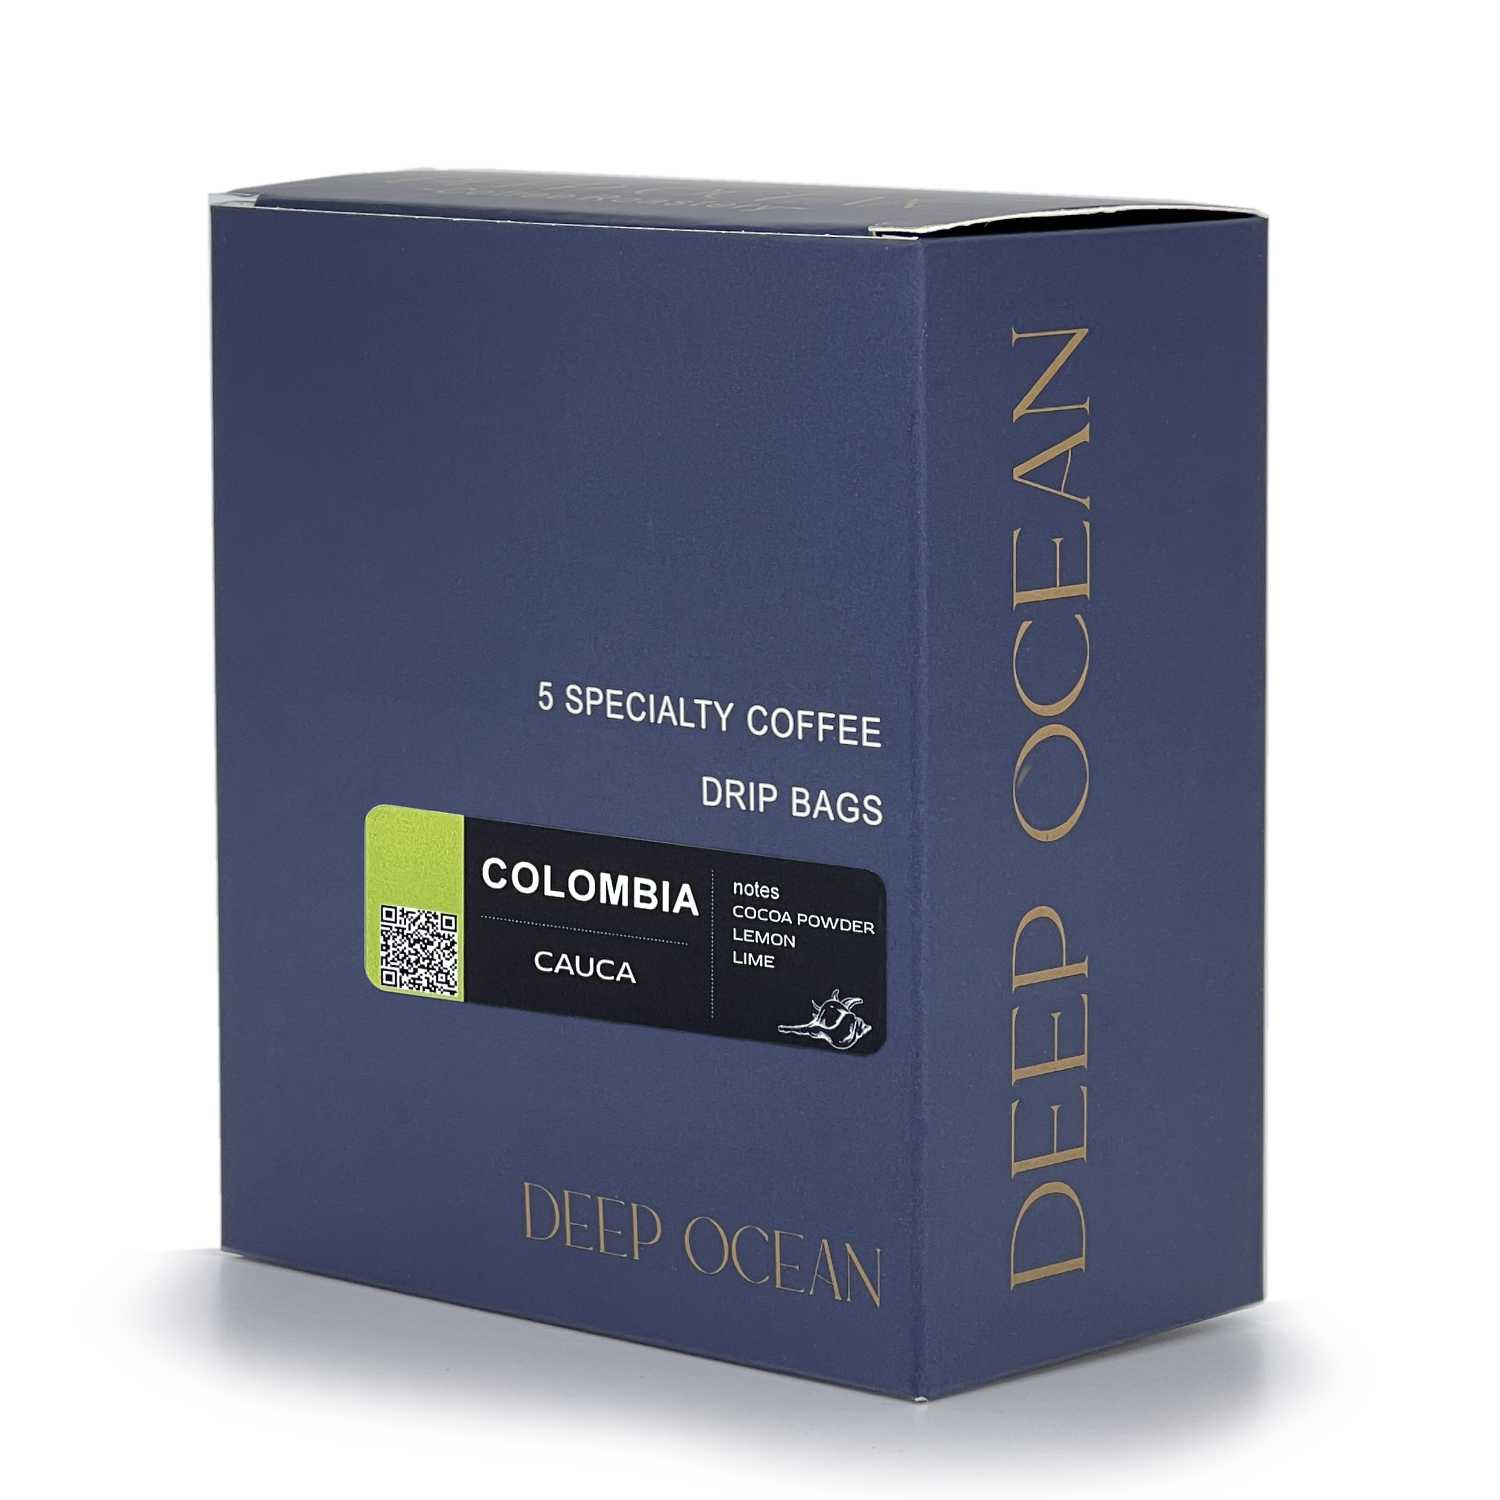 variant 1 - light roasted coffee Colombia for drip boxes is great choice of specialty coffee.